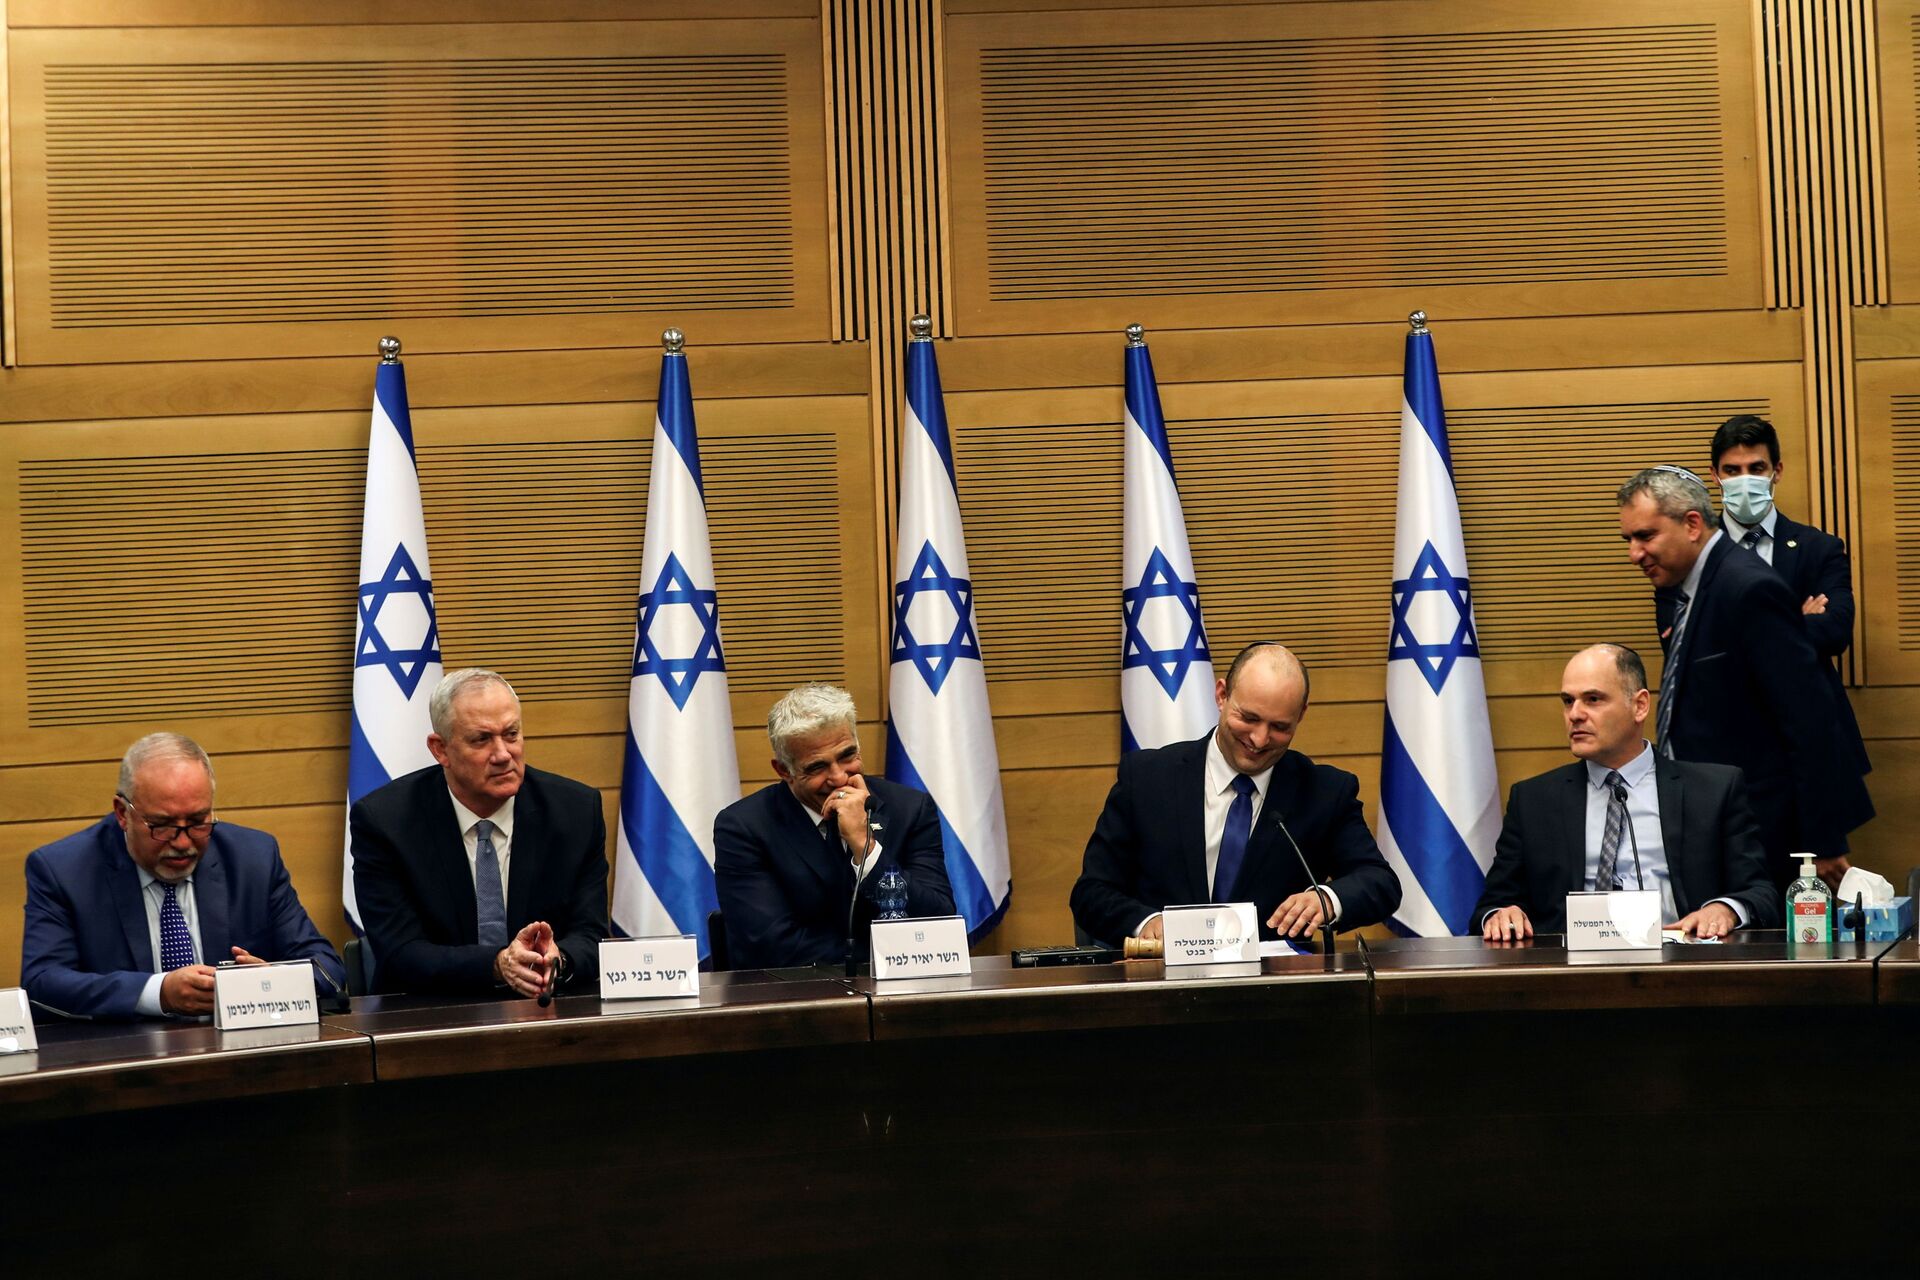 Israeli Prime Minister Naftali Bennett and some of his government attend its first cabinet meeting in the Knesset, Israel's parliament, in Jerusalem June 13, 2021. - Sputnik International, 1920, 05.11.2021